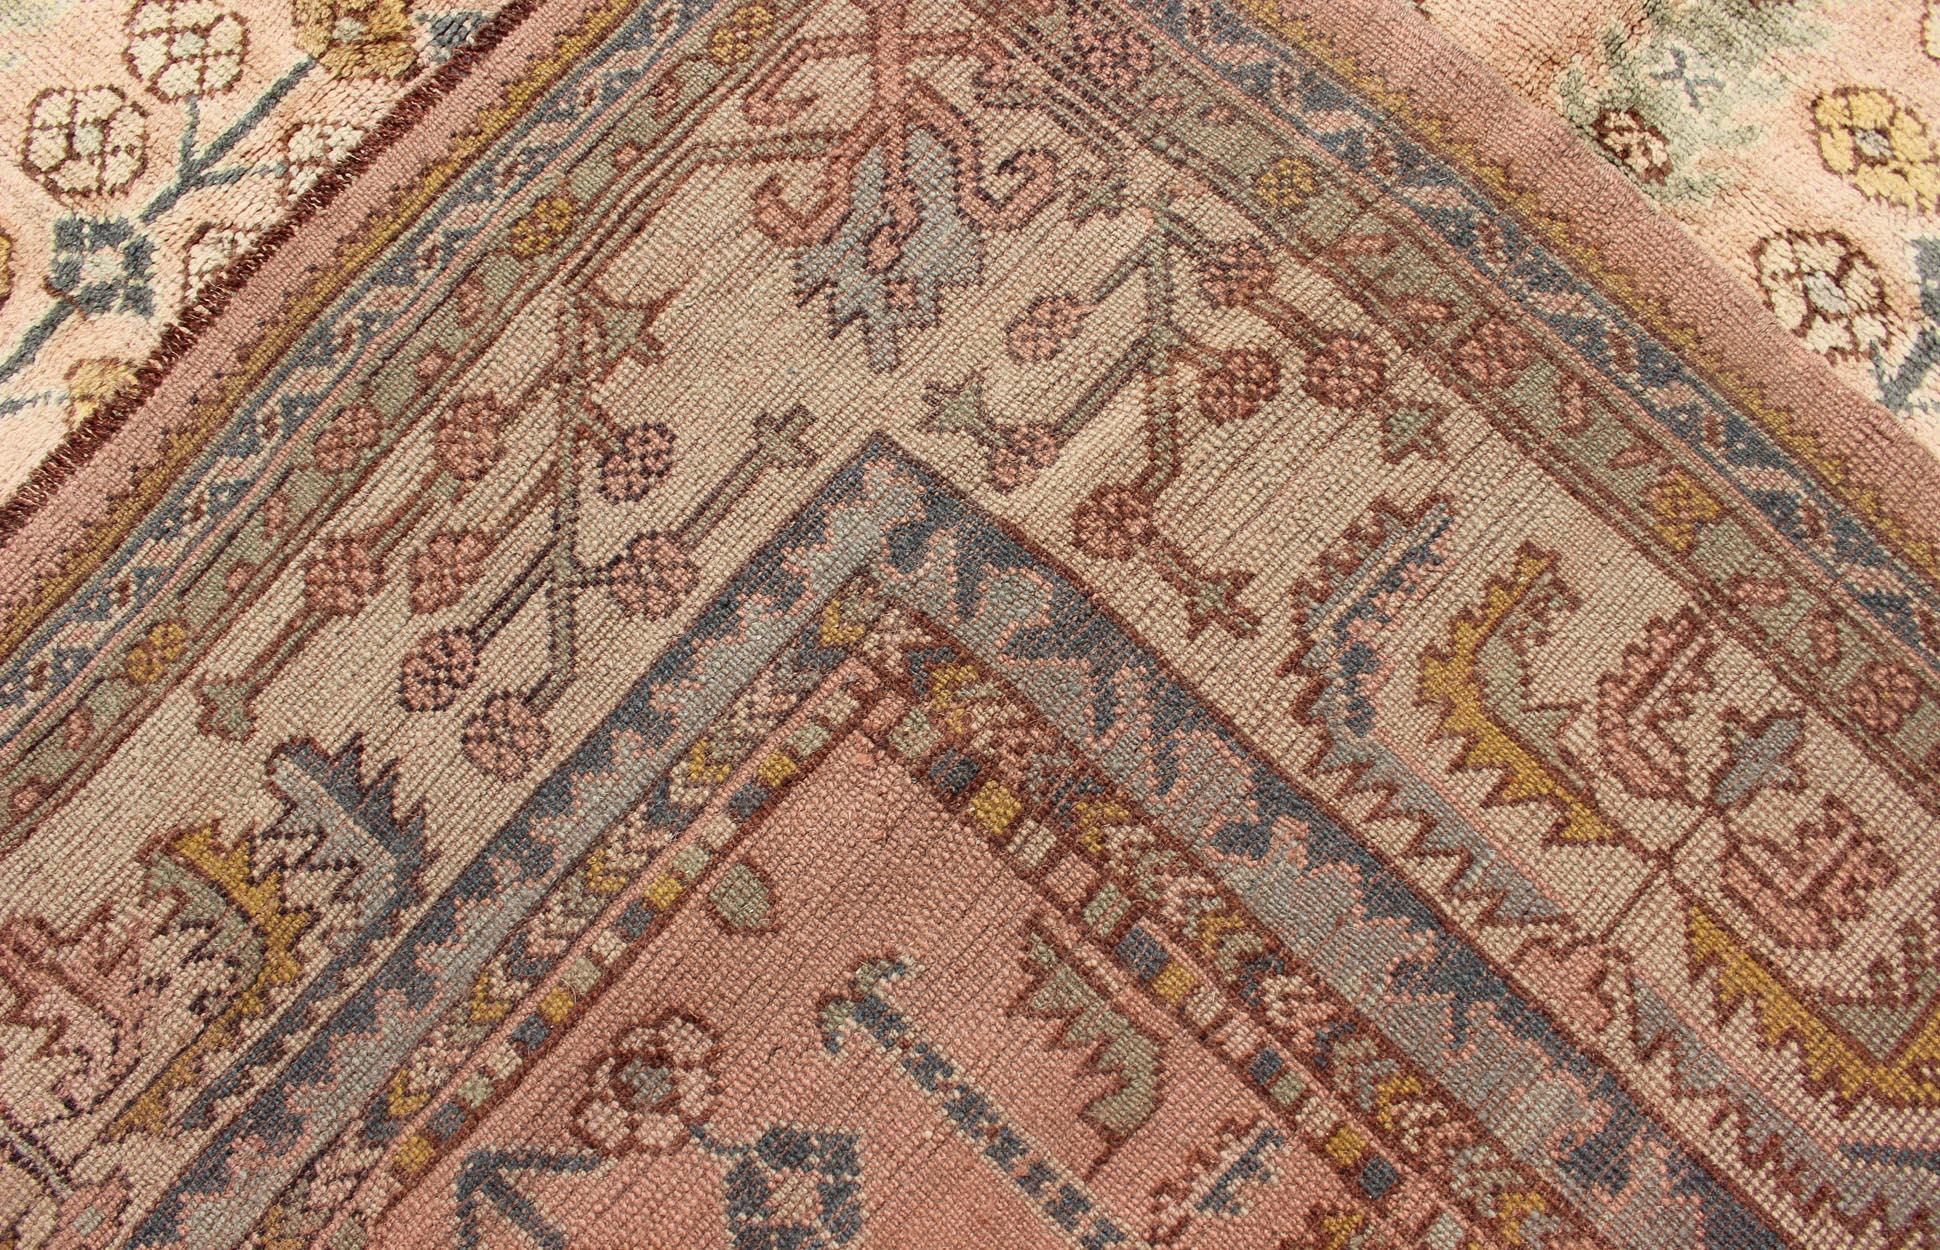 Turkish Oushak Antique Rug with Botanical Design in Salmon, Blue and Brown 8